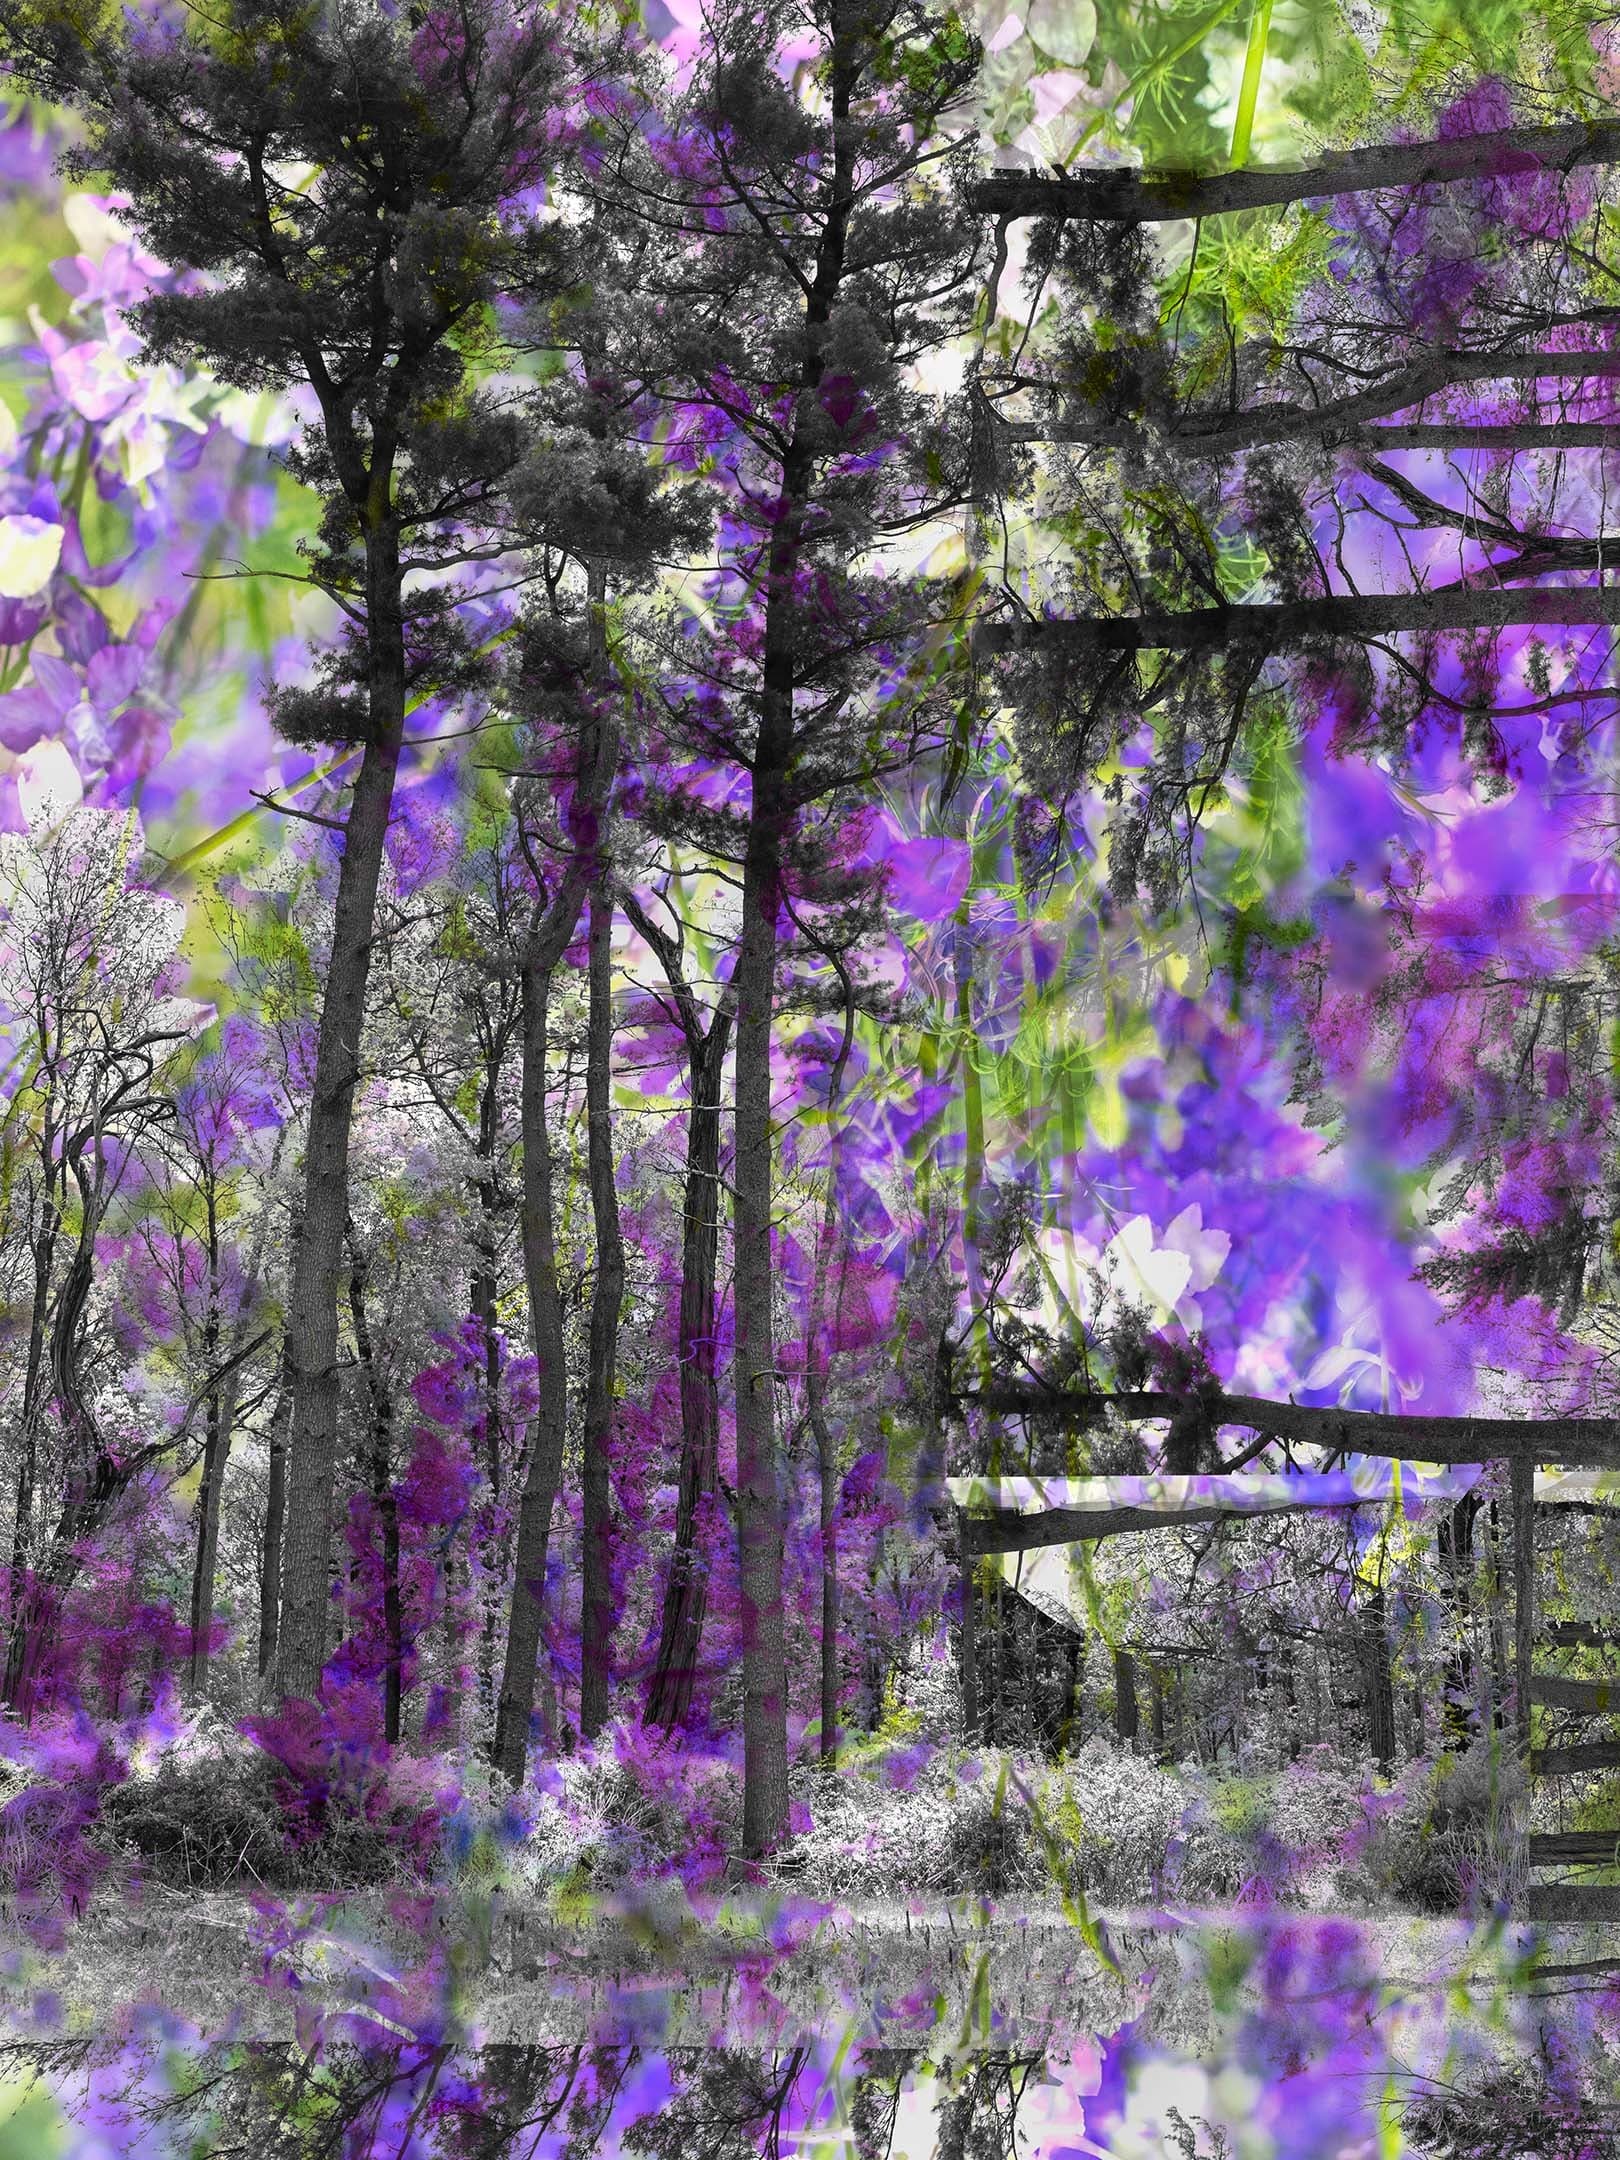 Composite image of the forest showing many angles in purple and bright green